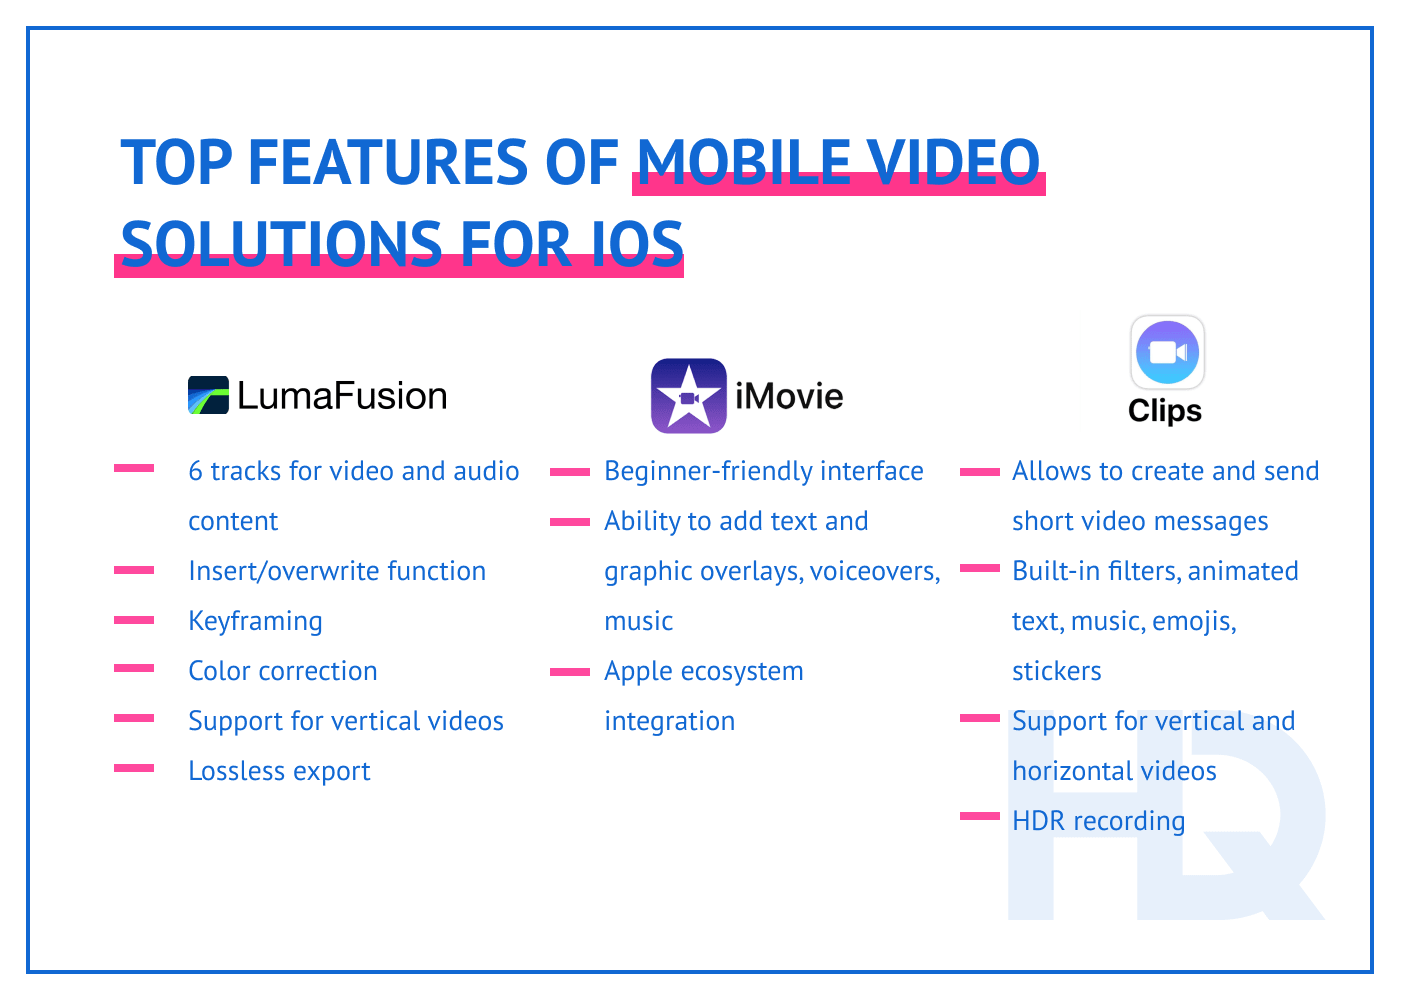 Features for mobile video solutions for iOS.